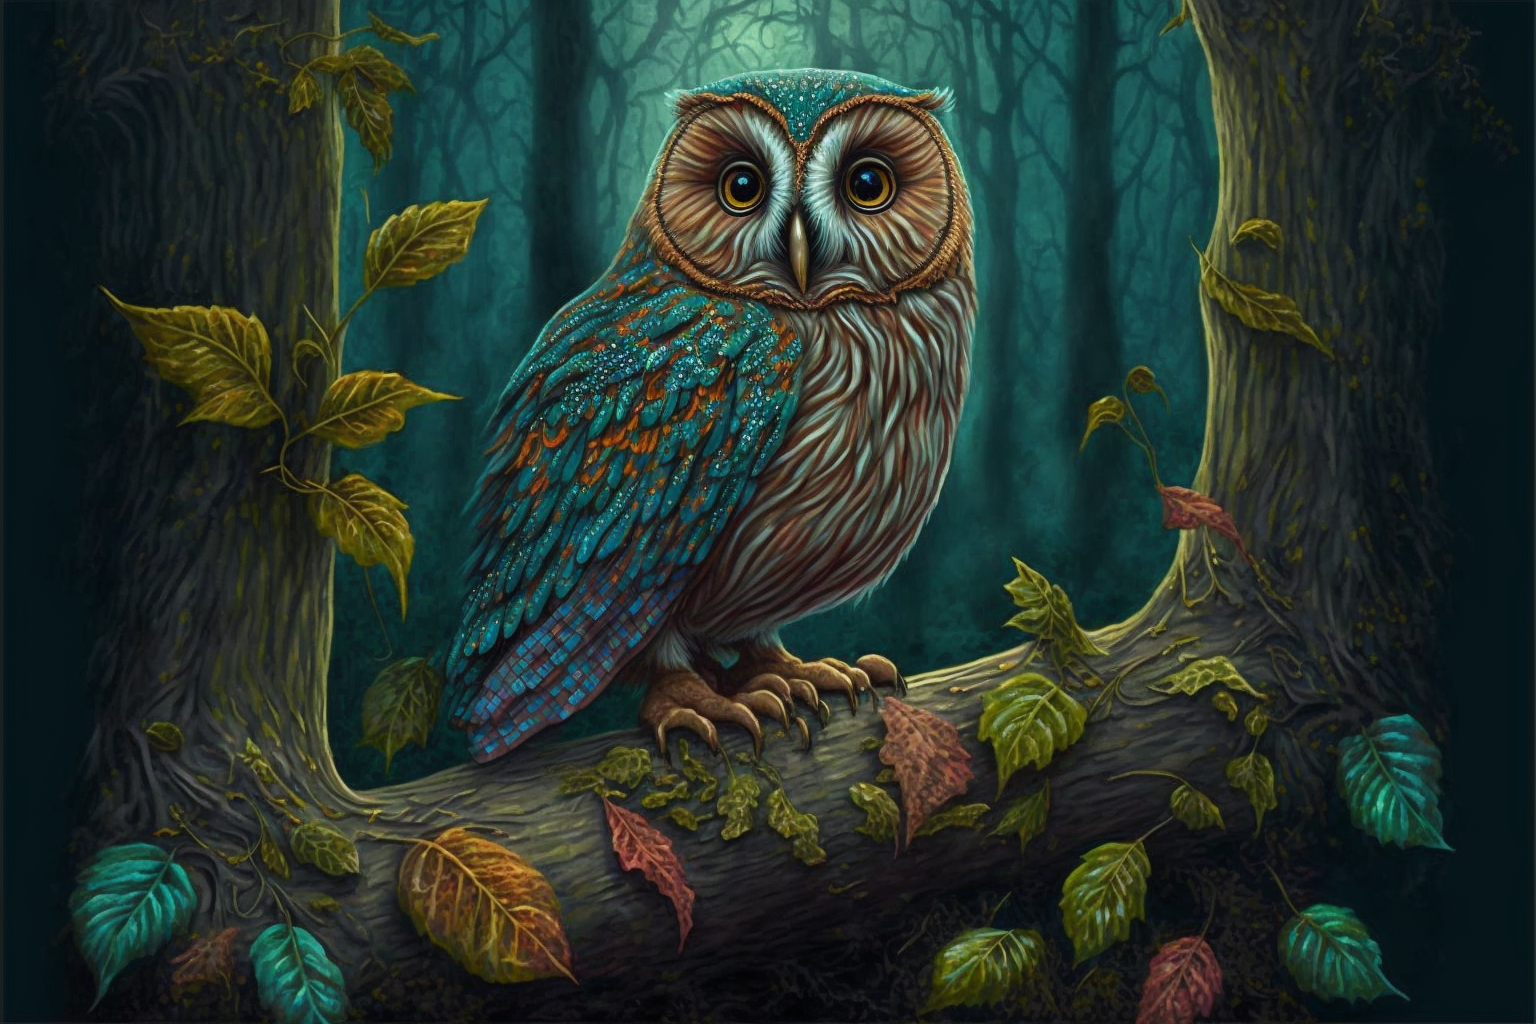 The Song of the Wise Old Owl